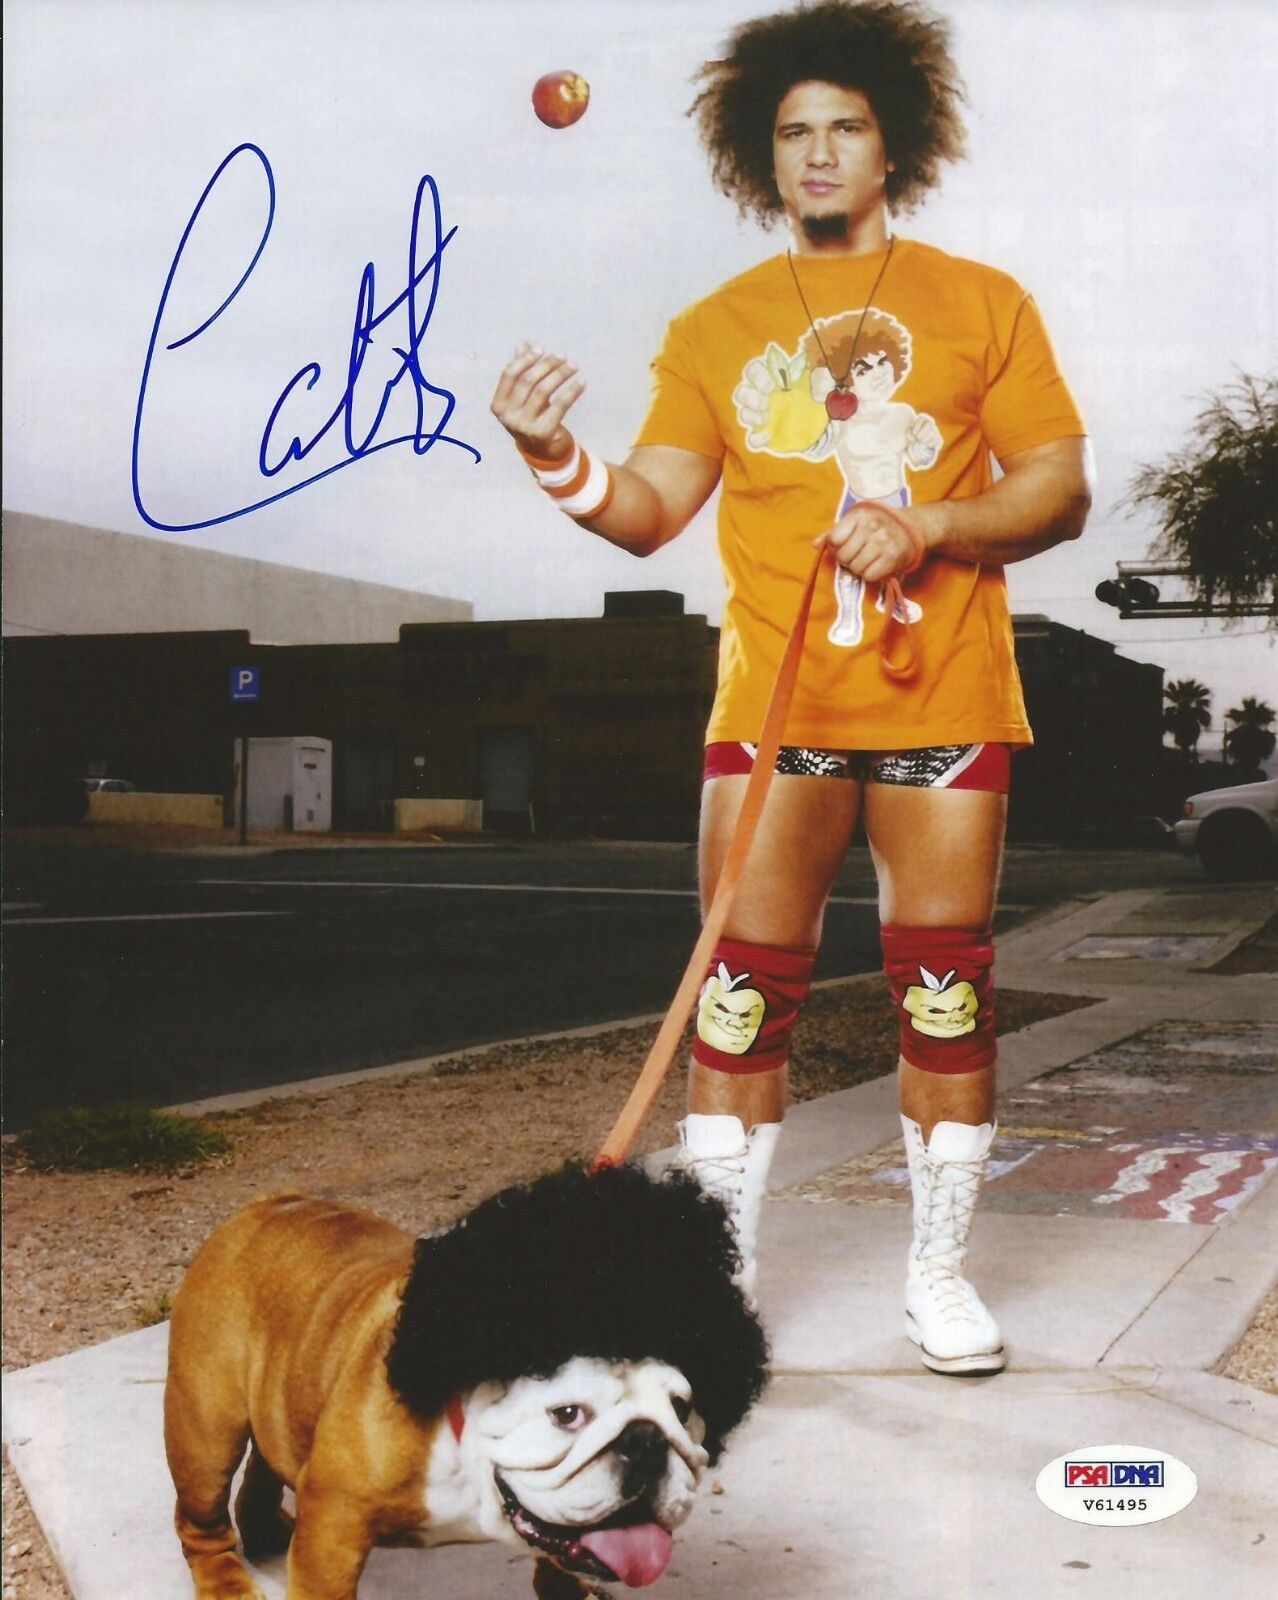 Carlito Carly Carlos Colon Signed WWE 8x10 Photo Poster painting PSA/DNA COA Picture Wrestling